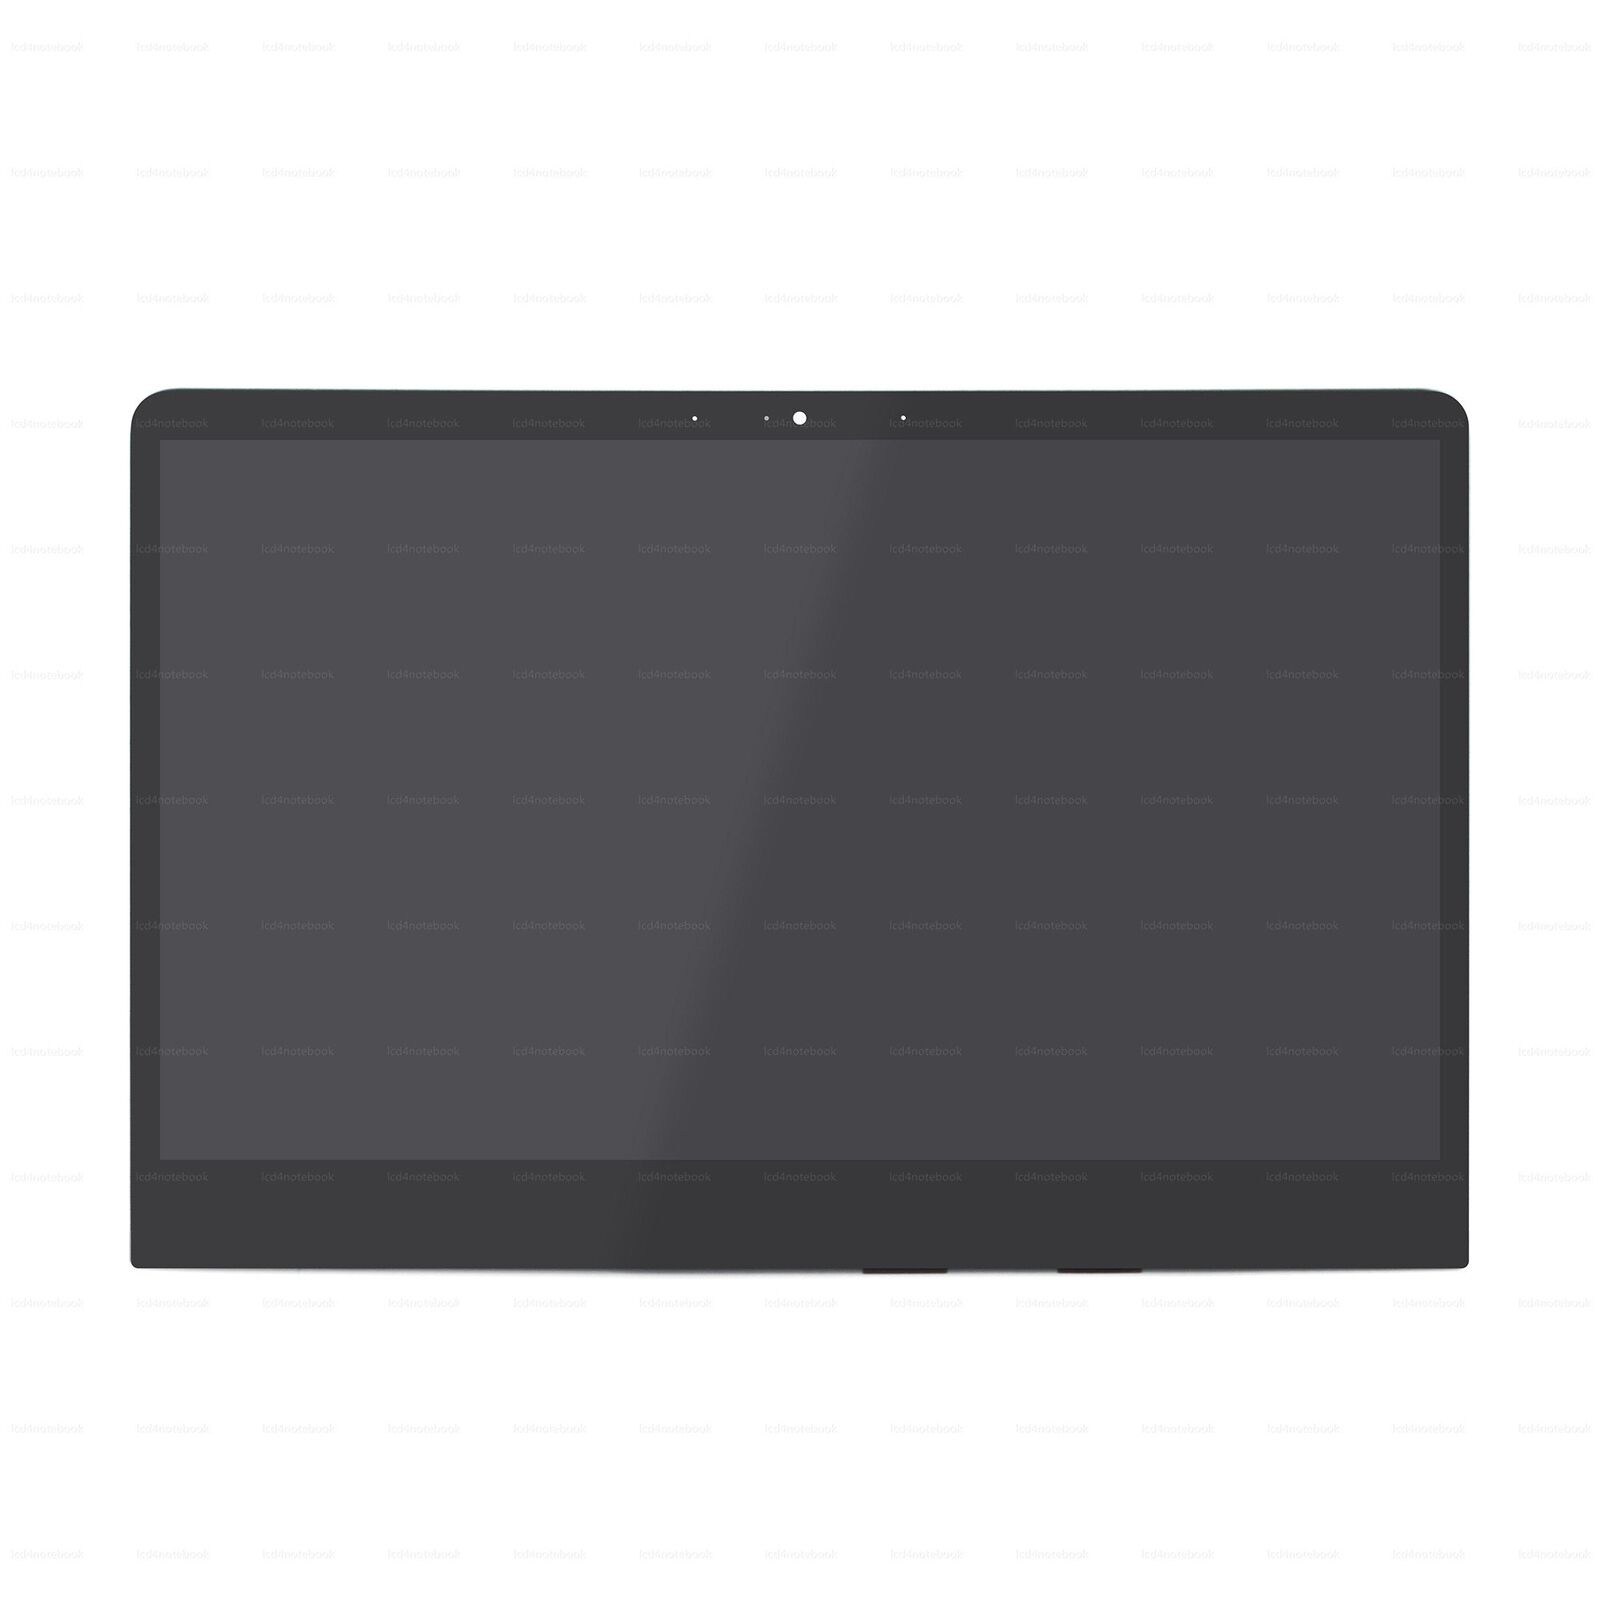 LCD Touch Screen for ASUS VivoBook Flip 14 TP401C TP401M TP401CA TP401MA TP401NA